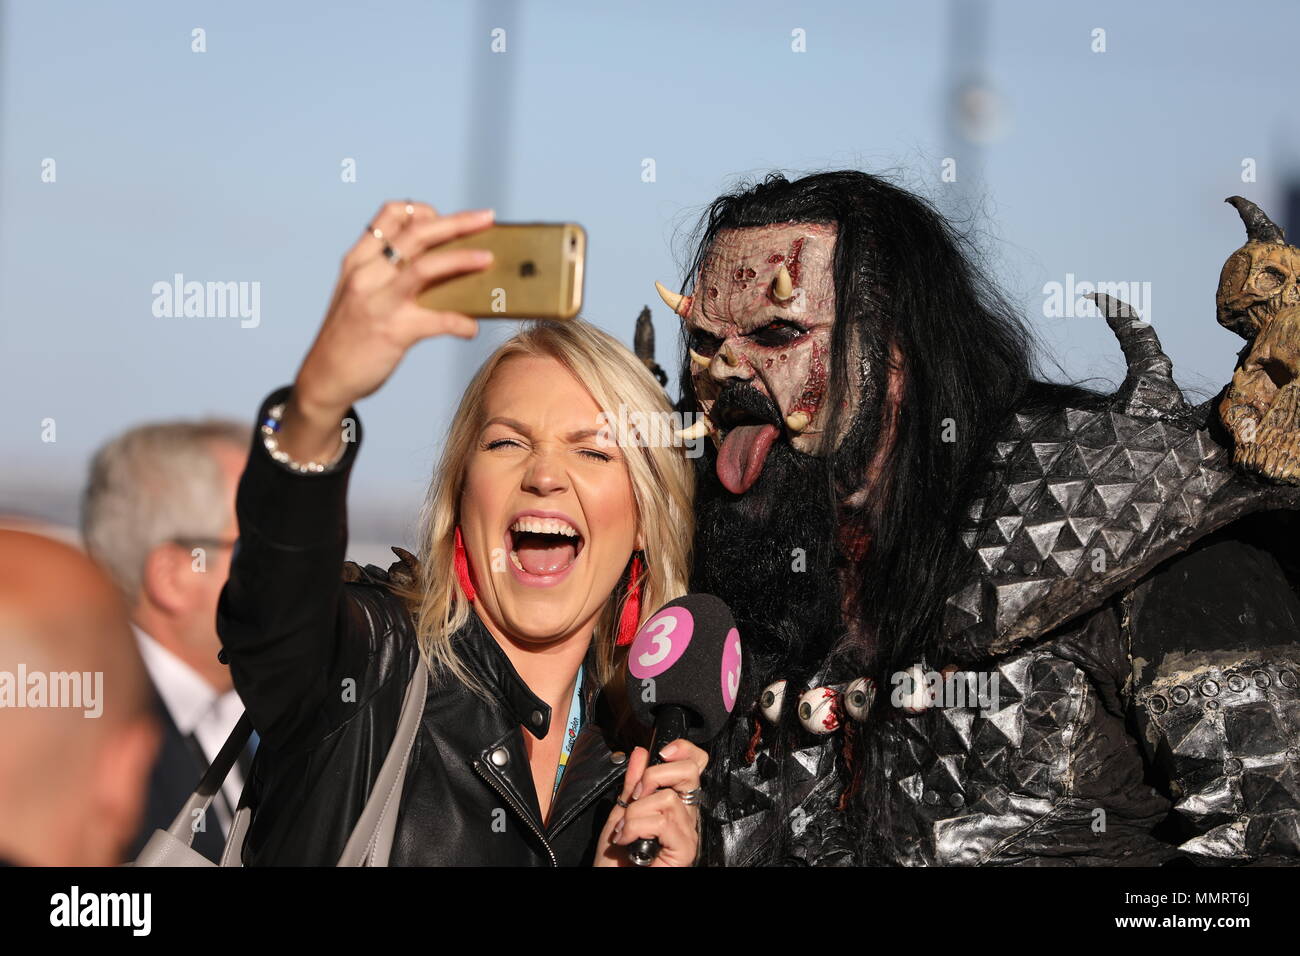 12 May 2018, Portugal, Lisbon: A television presenter takes a selfie with Mr. Lordi (Tomi Petteri Putaansuu), singer of Finnish band Lordi, shortly before the finals of the 63rd Eurovision Song Contest. Photo: Jörg Carstensen/dpa Stock Photo